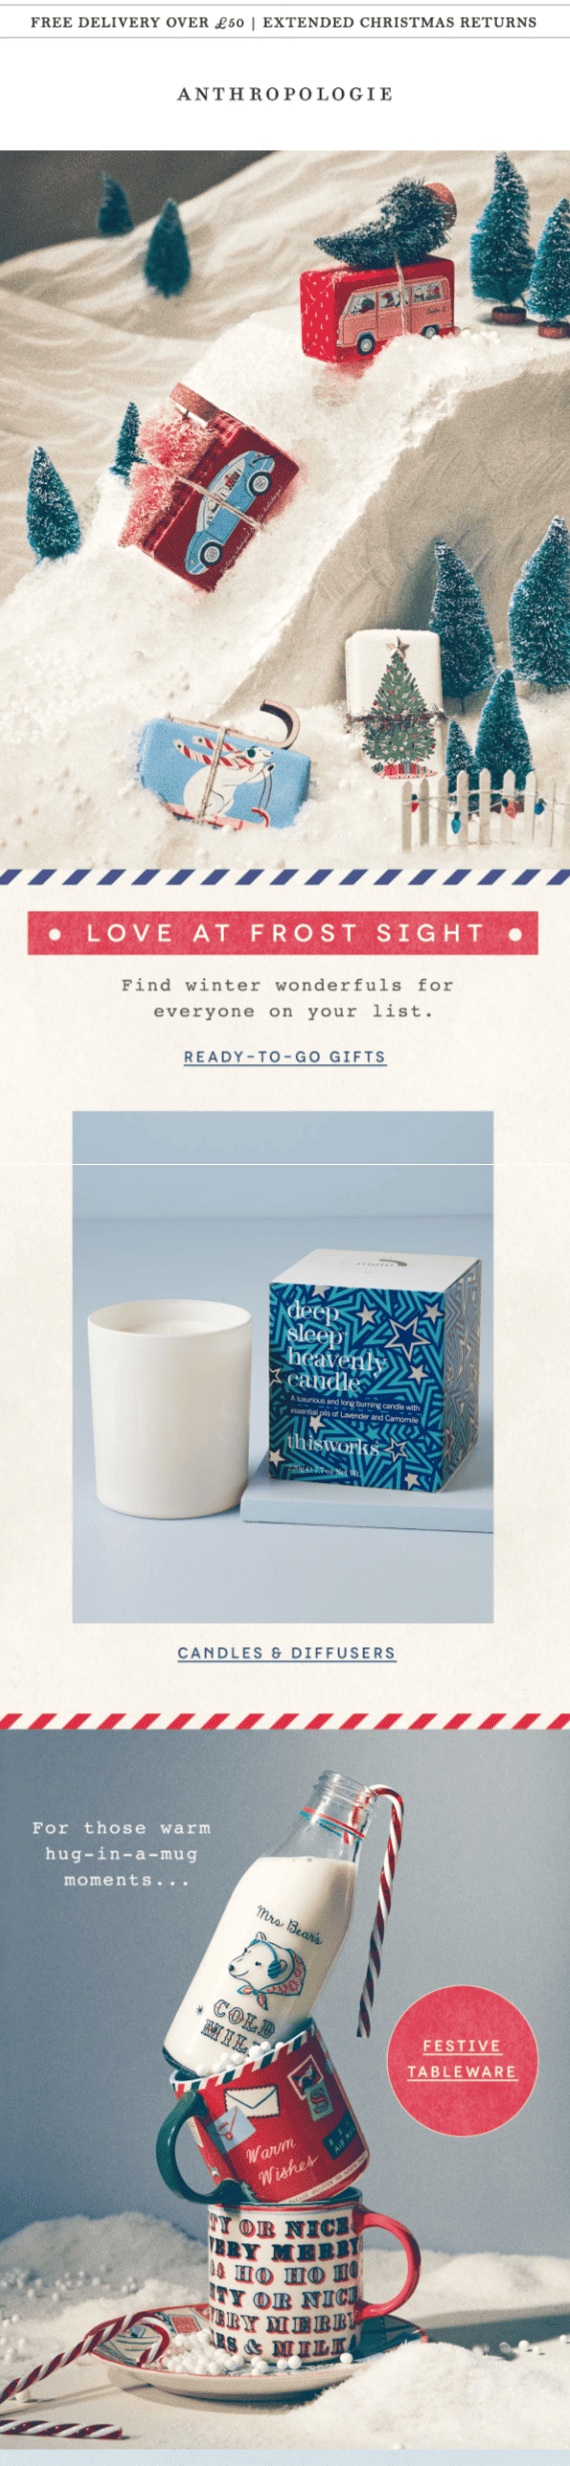 Anthropologie offer email